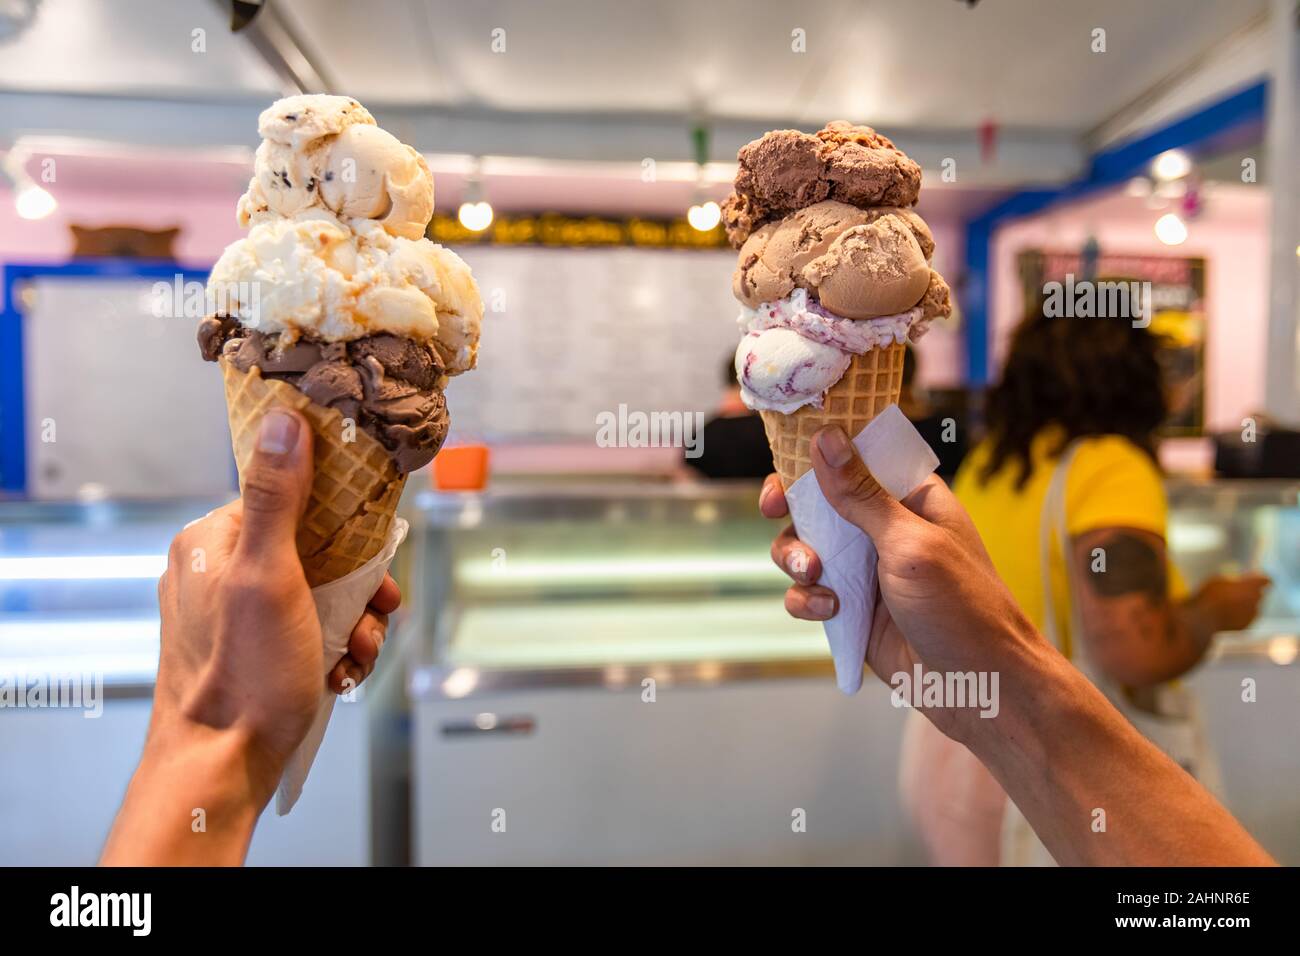 A close up and first person perspective of a man holding two waffles cone with scoops of ice cream at a shop, with blurry menu in the background Stock Photo